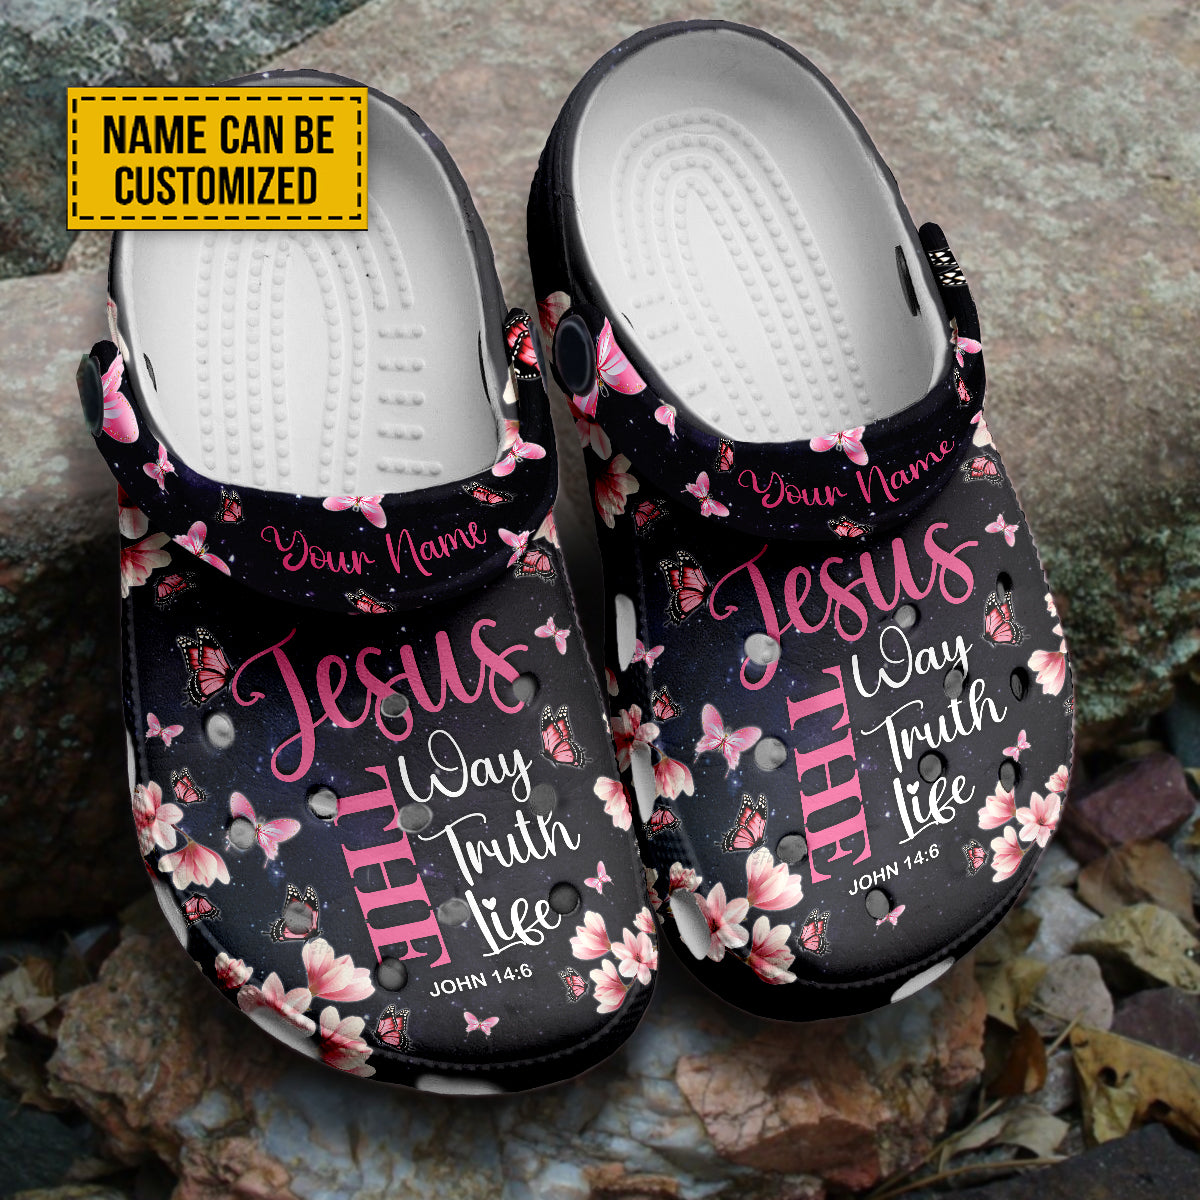 Teesdily | Jesus The Way The Truth The Life Customized Clogs Shoes, Gift For Jesus Lovers, God Faith Believers, Christian Gifts, Kid & Adult Unisex Clogs Shoes Eva